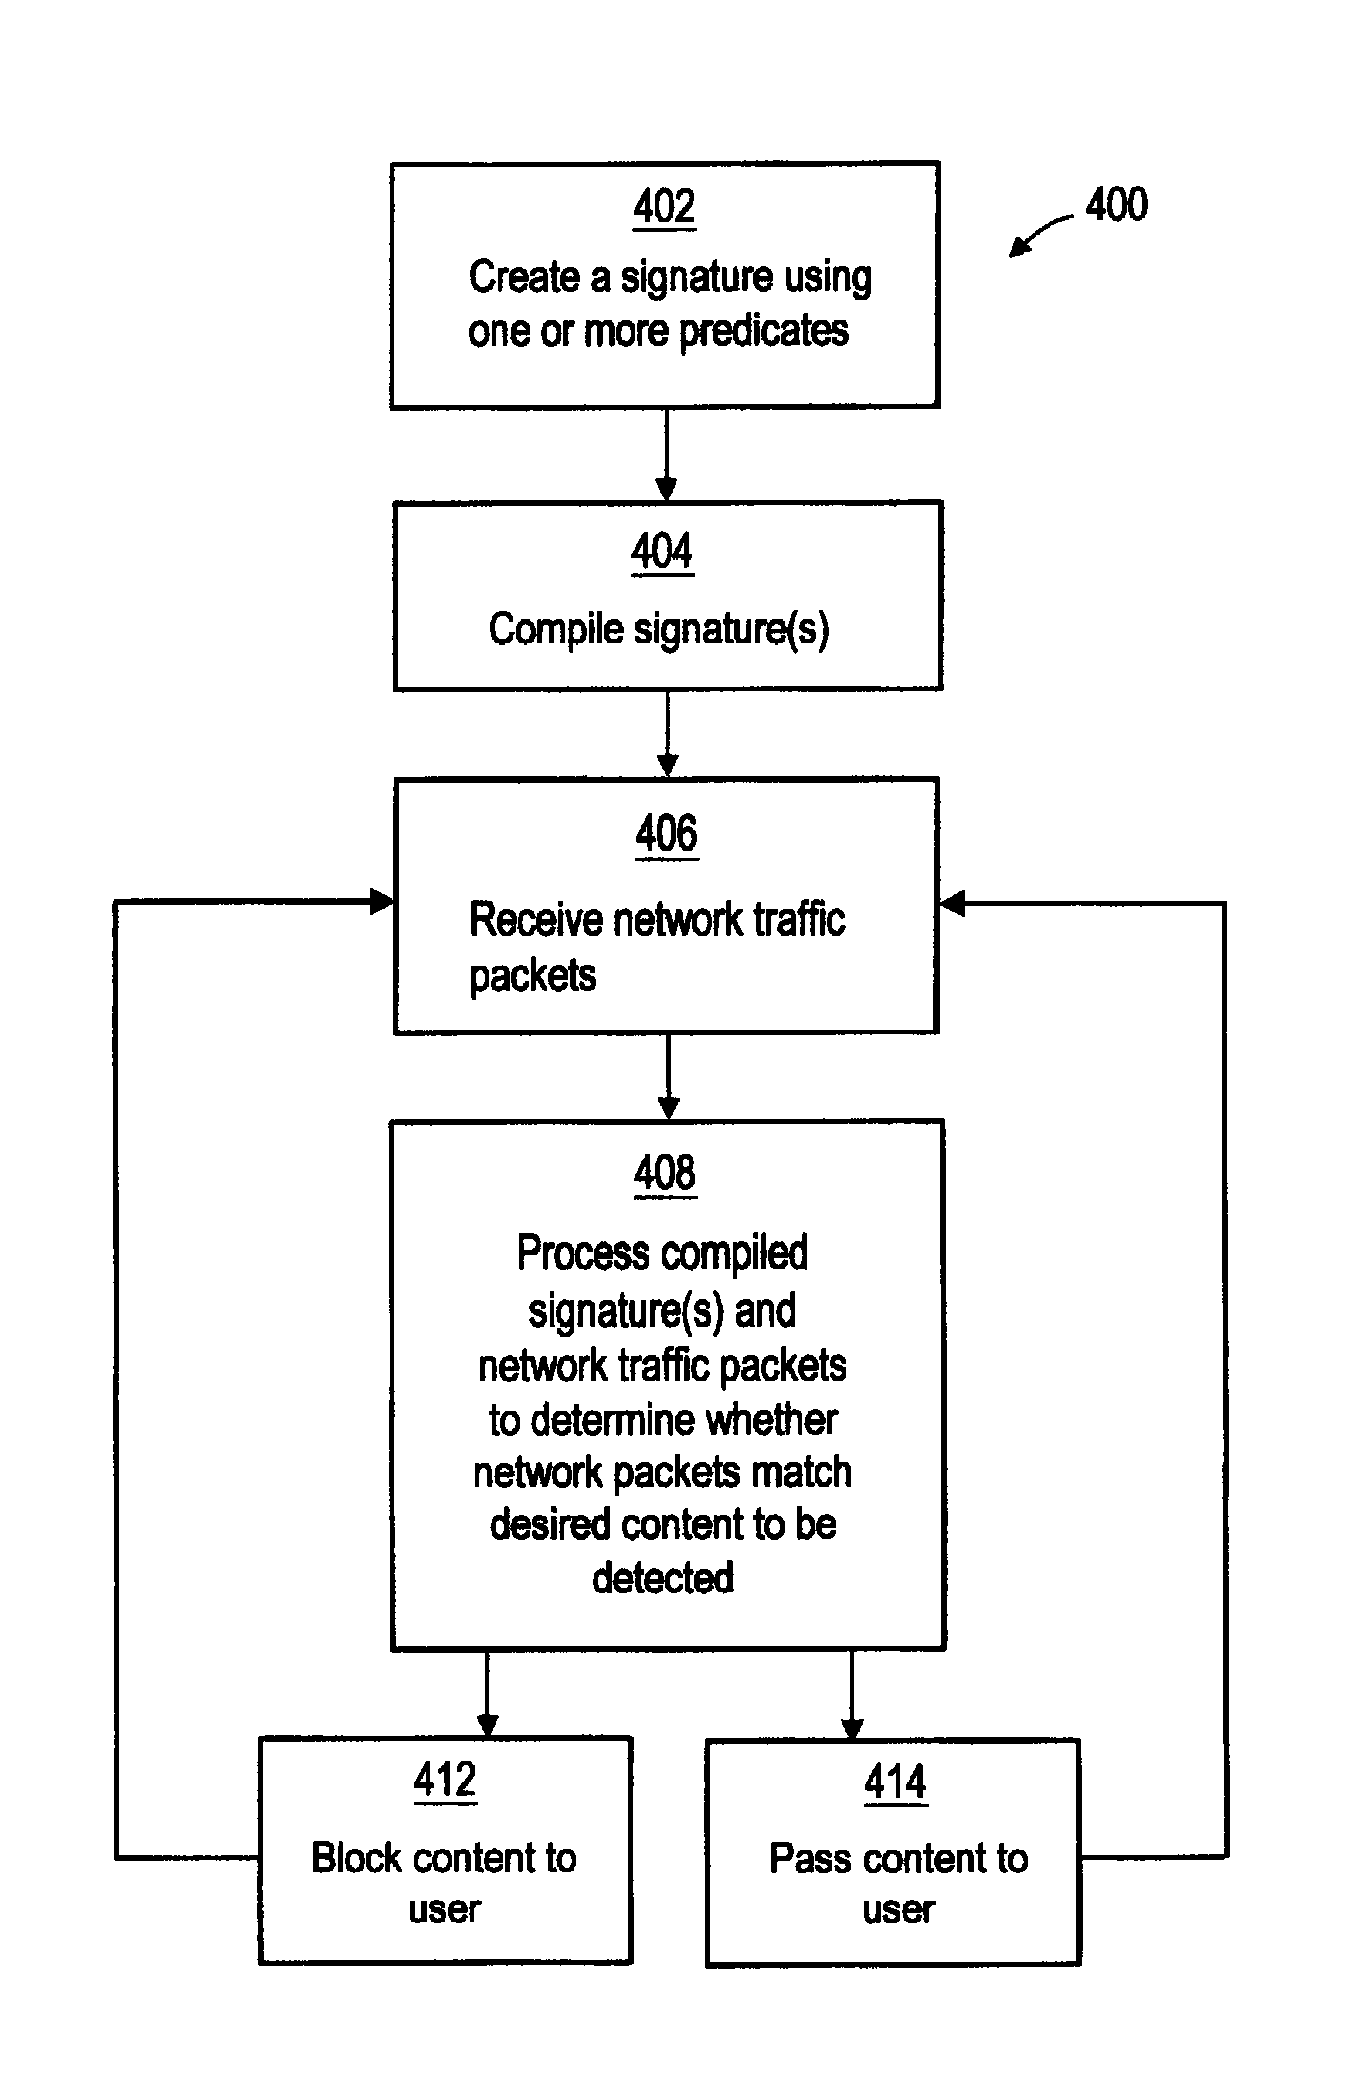 Content pattern recognition language processor and methods of using the same